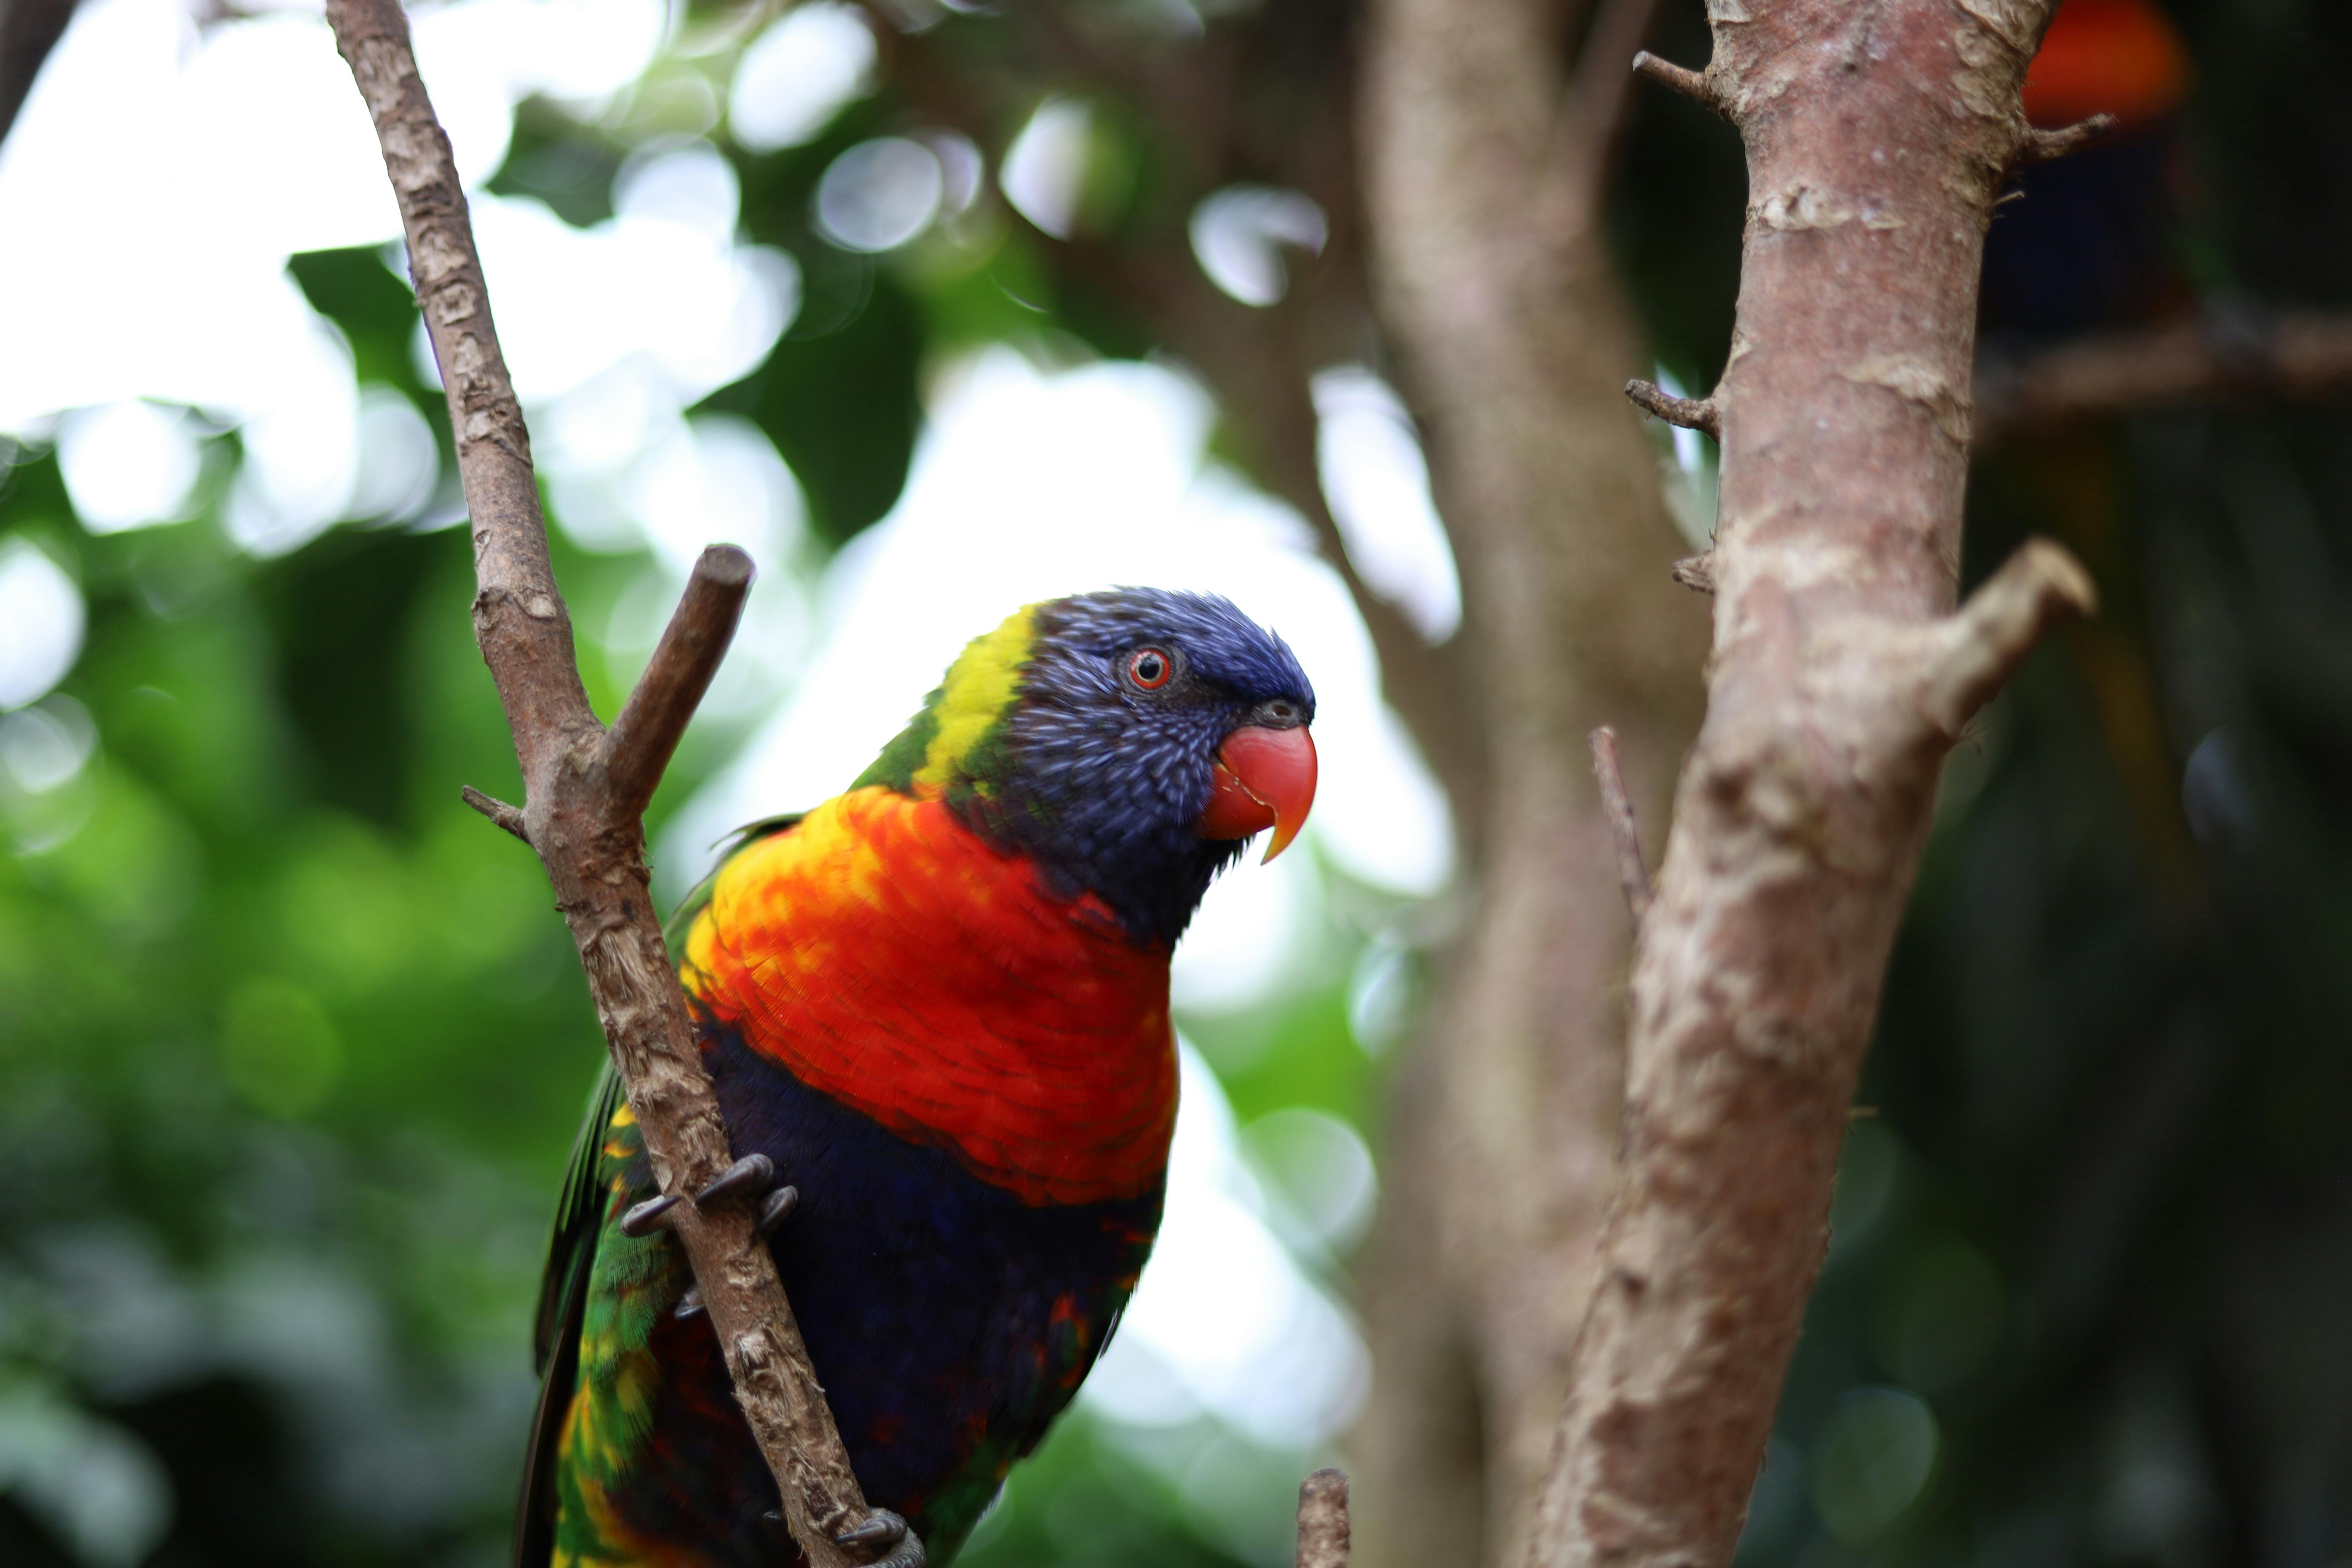 A parrot perched on a tree branch. | Photo: Pexels